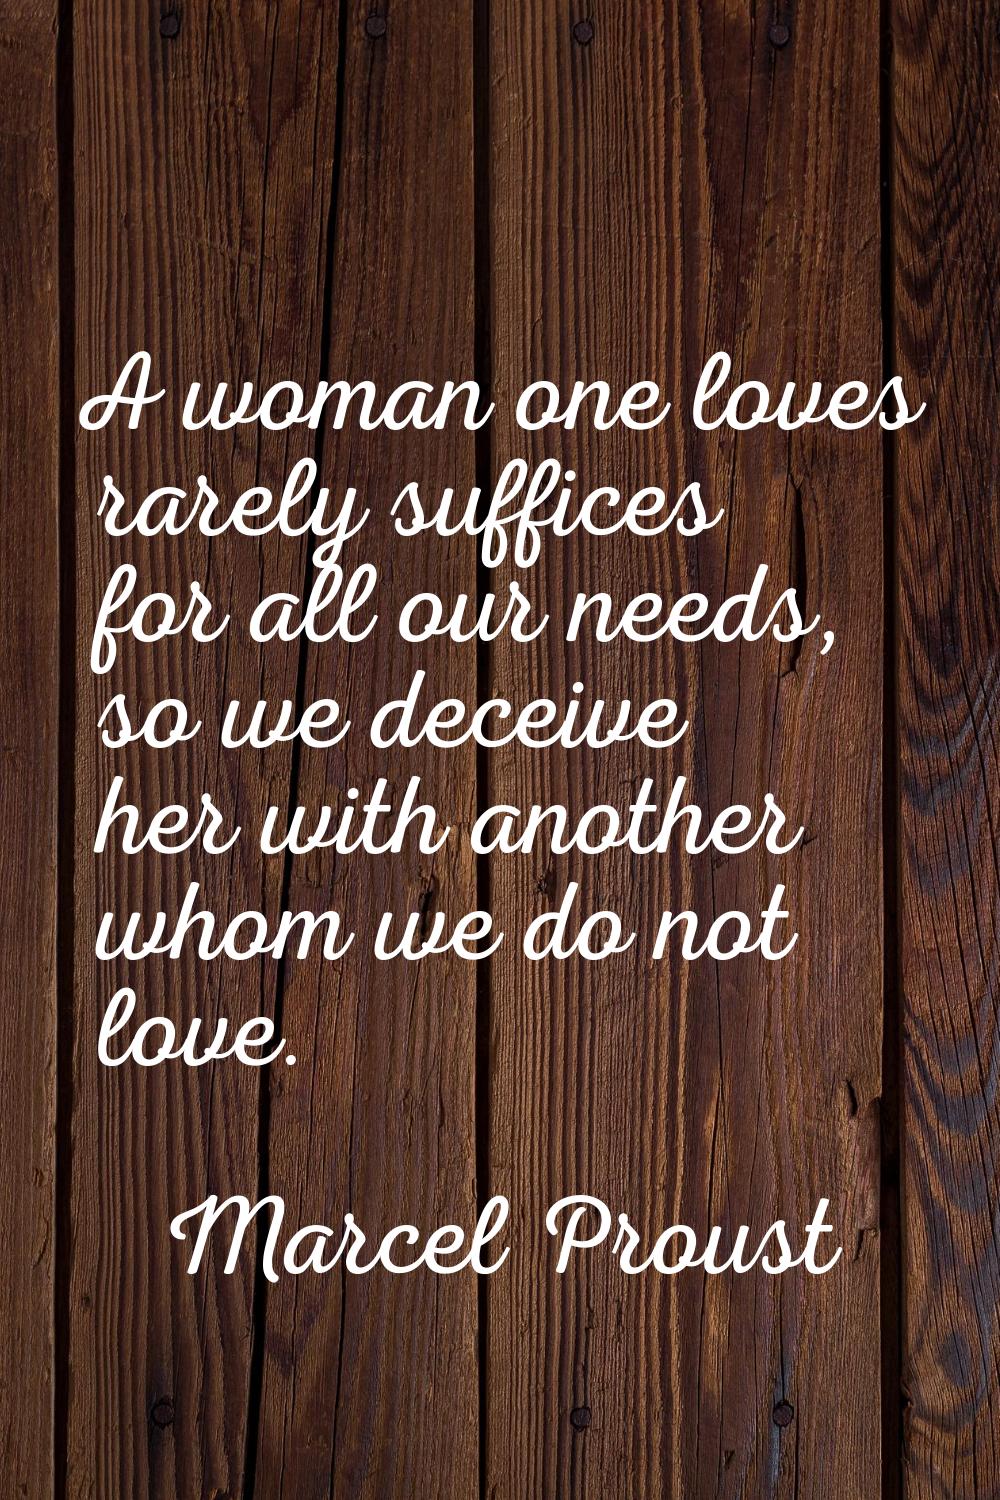 A woman one loves rarely suffices for all our needs, so we deceive her with another whom we do not 